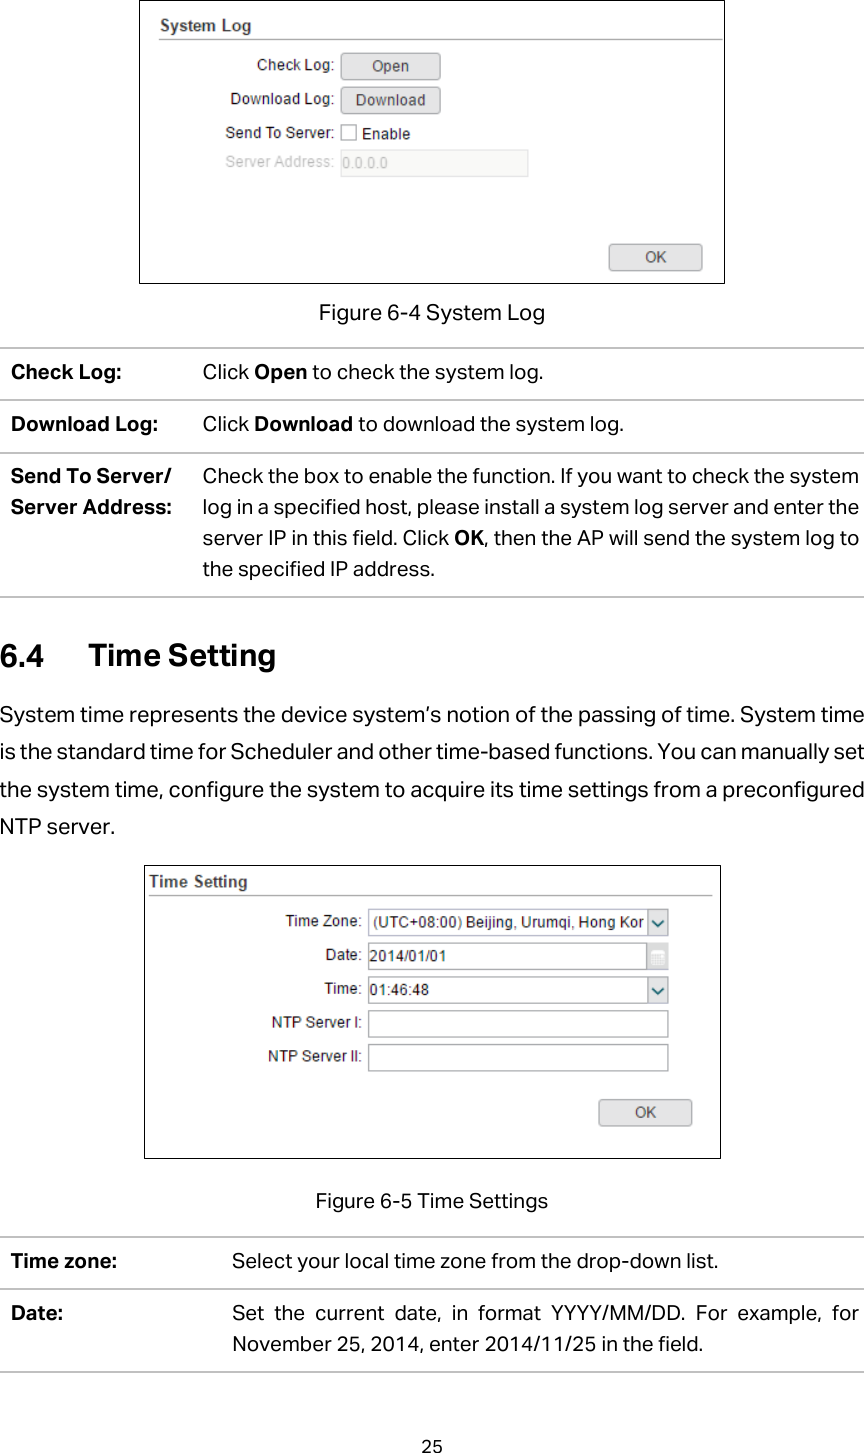  Figure 6-4 System Log Check Log:   Click Open to check the system log. Download Log: Click Download to download the system log. Send To Server/ Server Address: Check the box to enable the function. If you want to check the system log in a specified host, please install a system log server and enter the server IP in this field. Click OK, then the AP will send the system log to the specified IP address.  Time Setting System time represents the device system’s notion of the passing of time. System time is the standard time for Scheduler and other time-based functions. You can manually set the system time, configure the system to acquire its time settings from a preconfigured NTP server.  Figure 6-5 Time Settings Time zone: Select your local time zone from the drop-down list. Date: Set the current date, in format YYYY/MM/DD. For example, for November 25, 2014, enter 2014/11/25 in the field. 25  